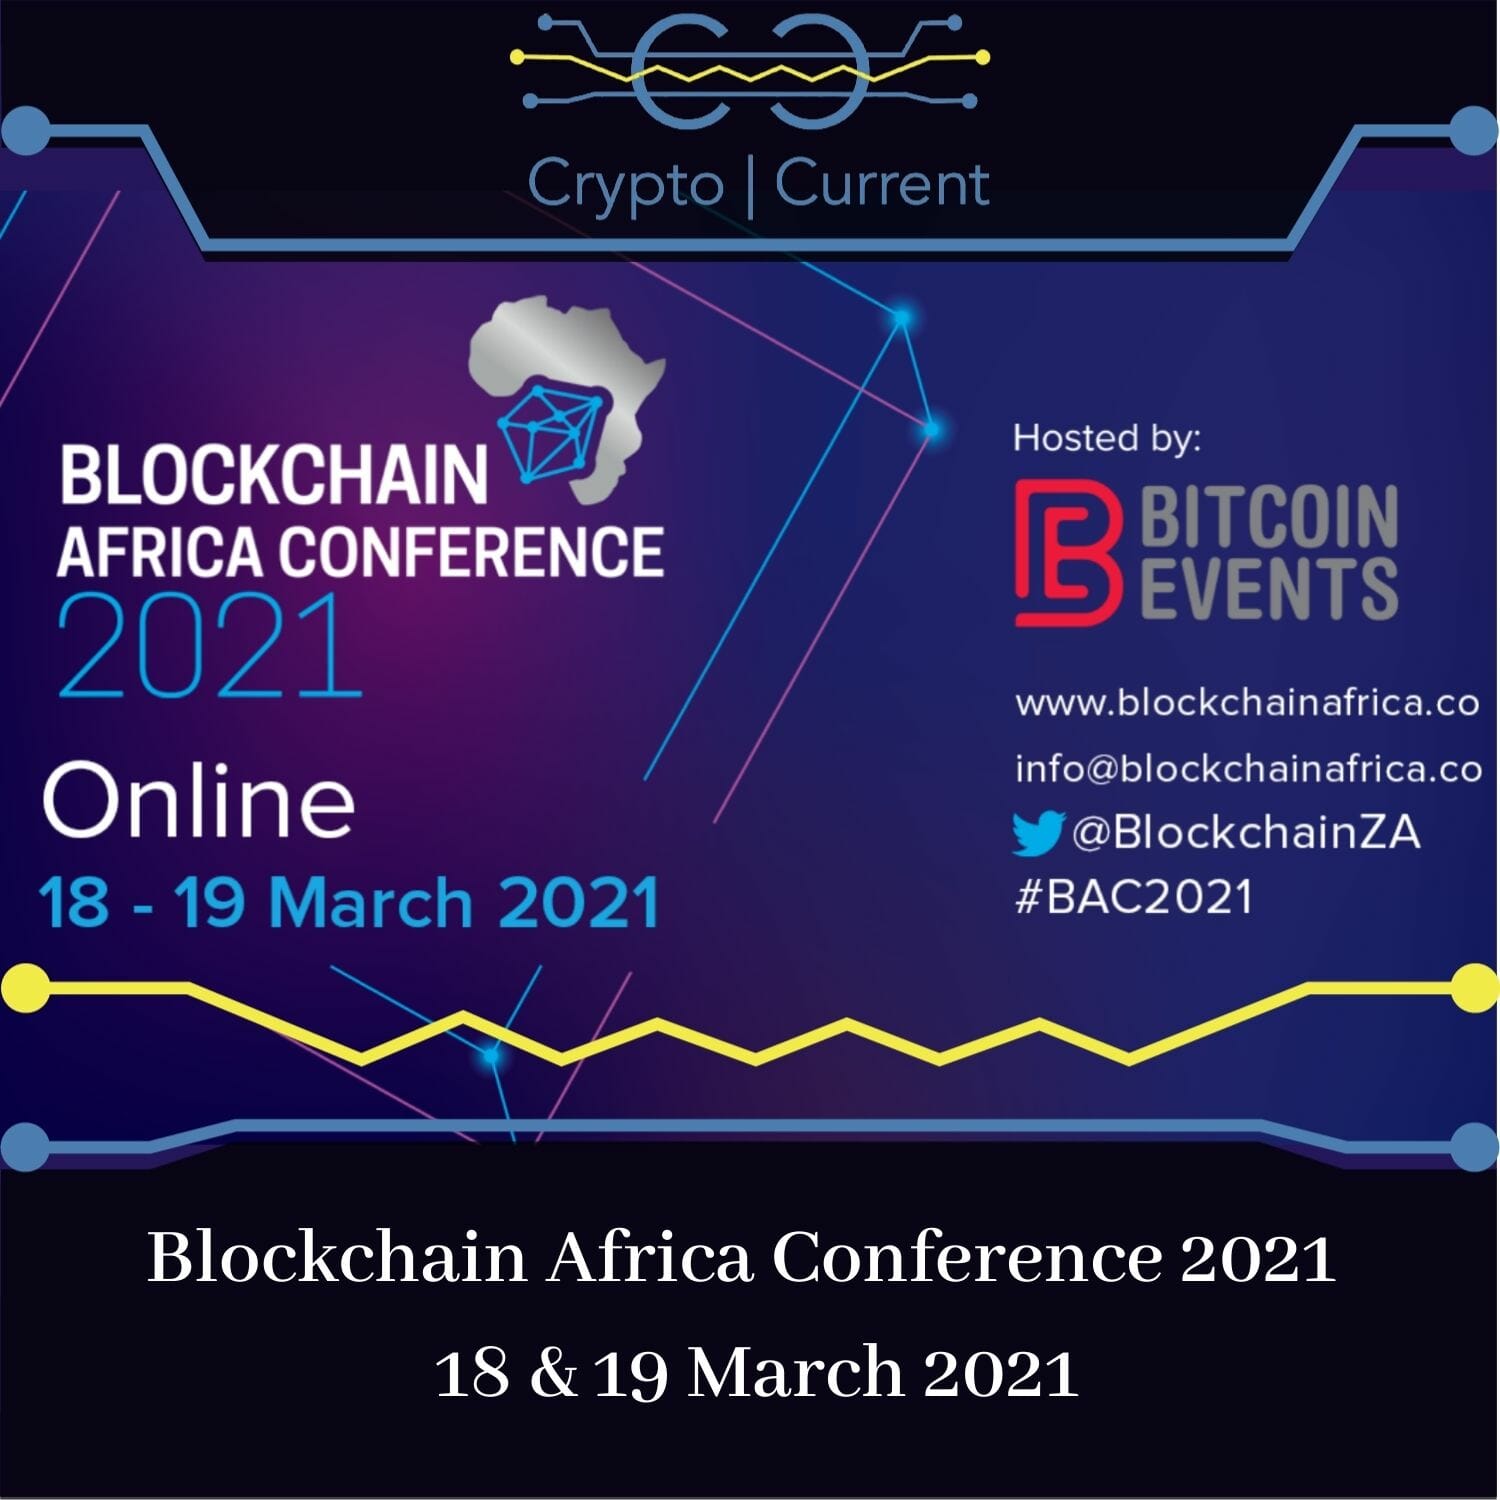 Blockchain Africa Conference 2021 | 18 & 19 March 2021